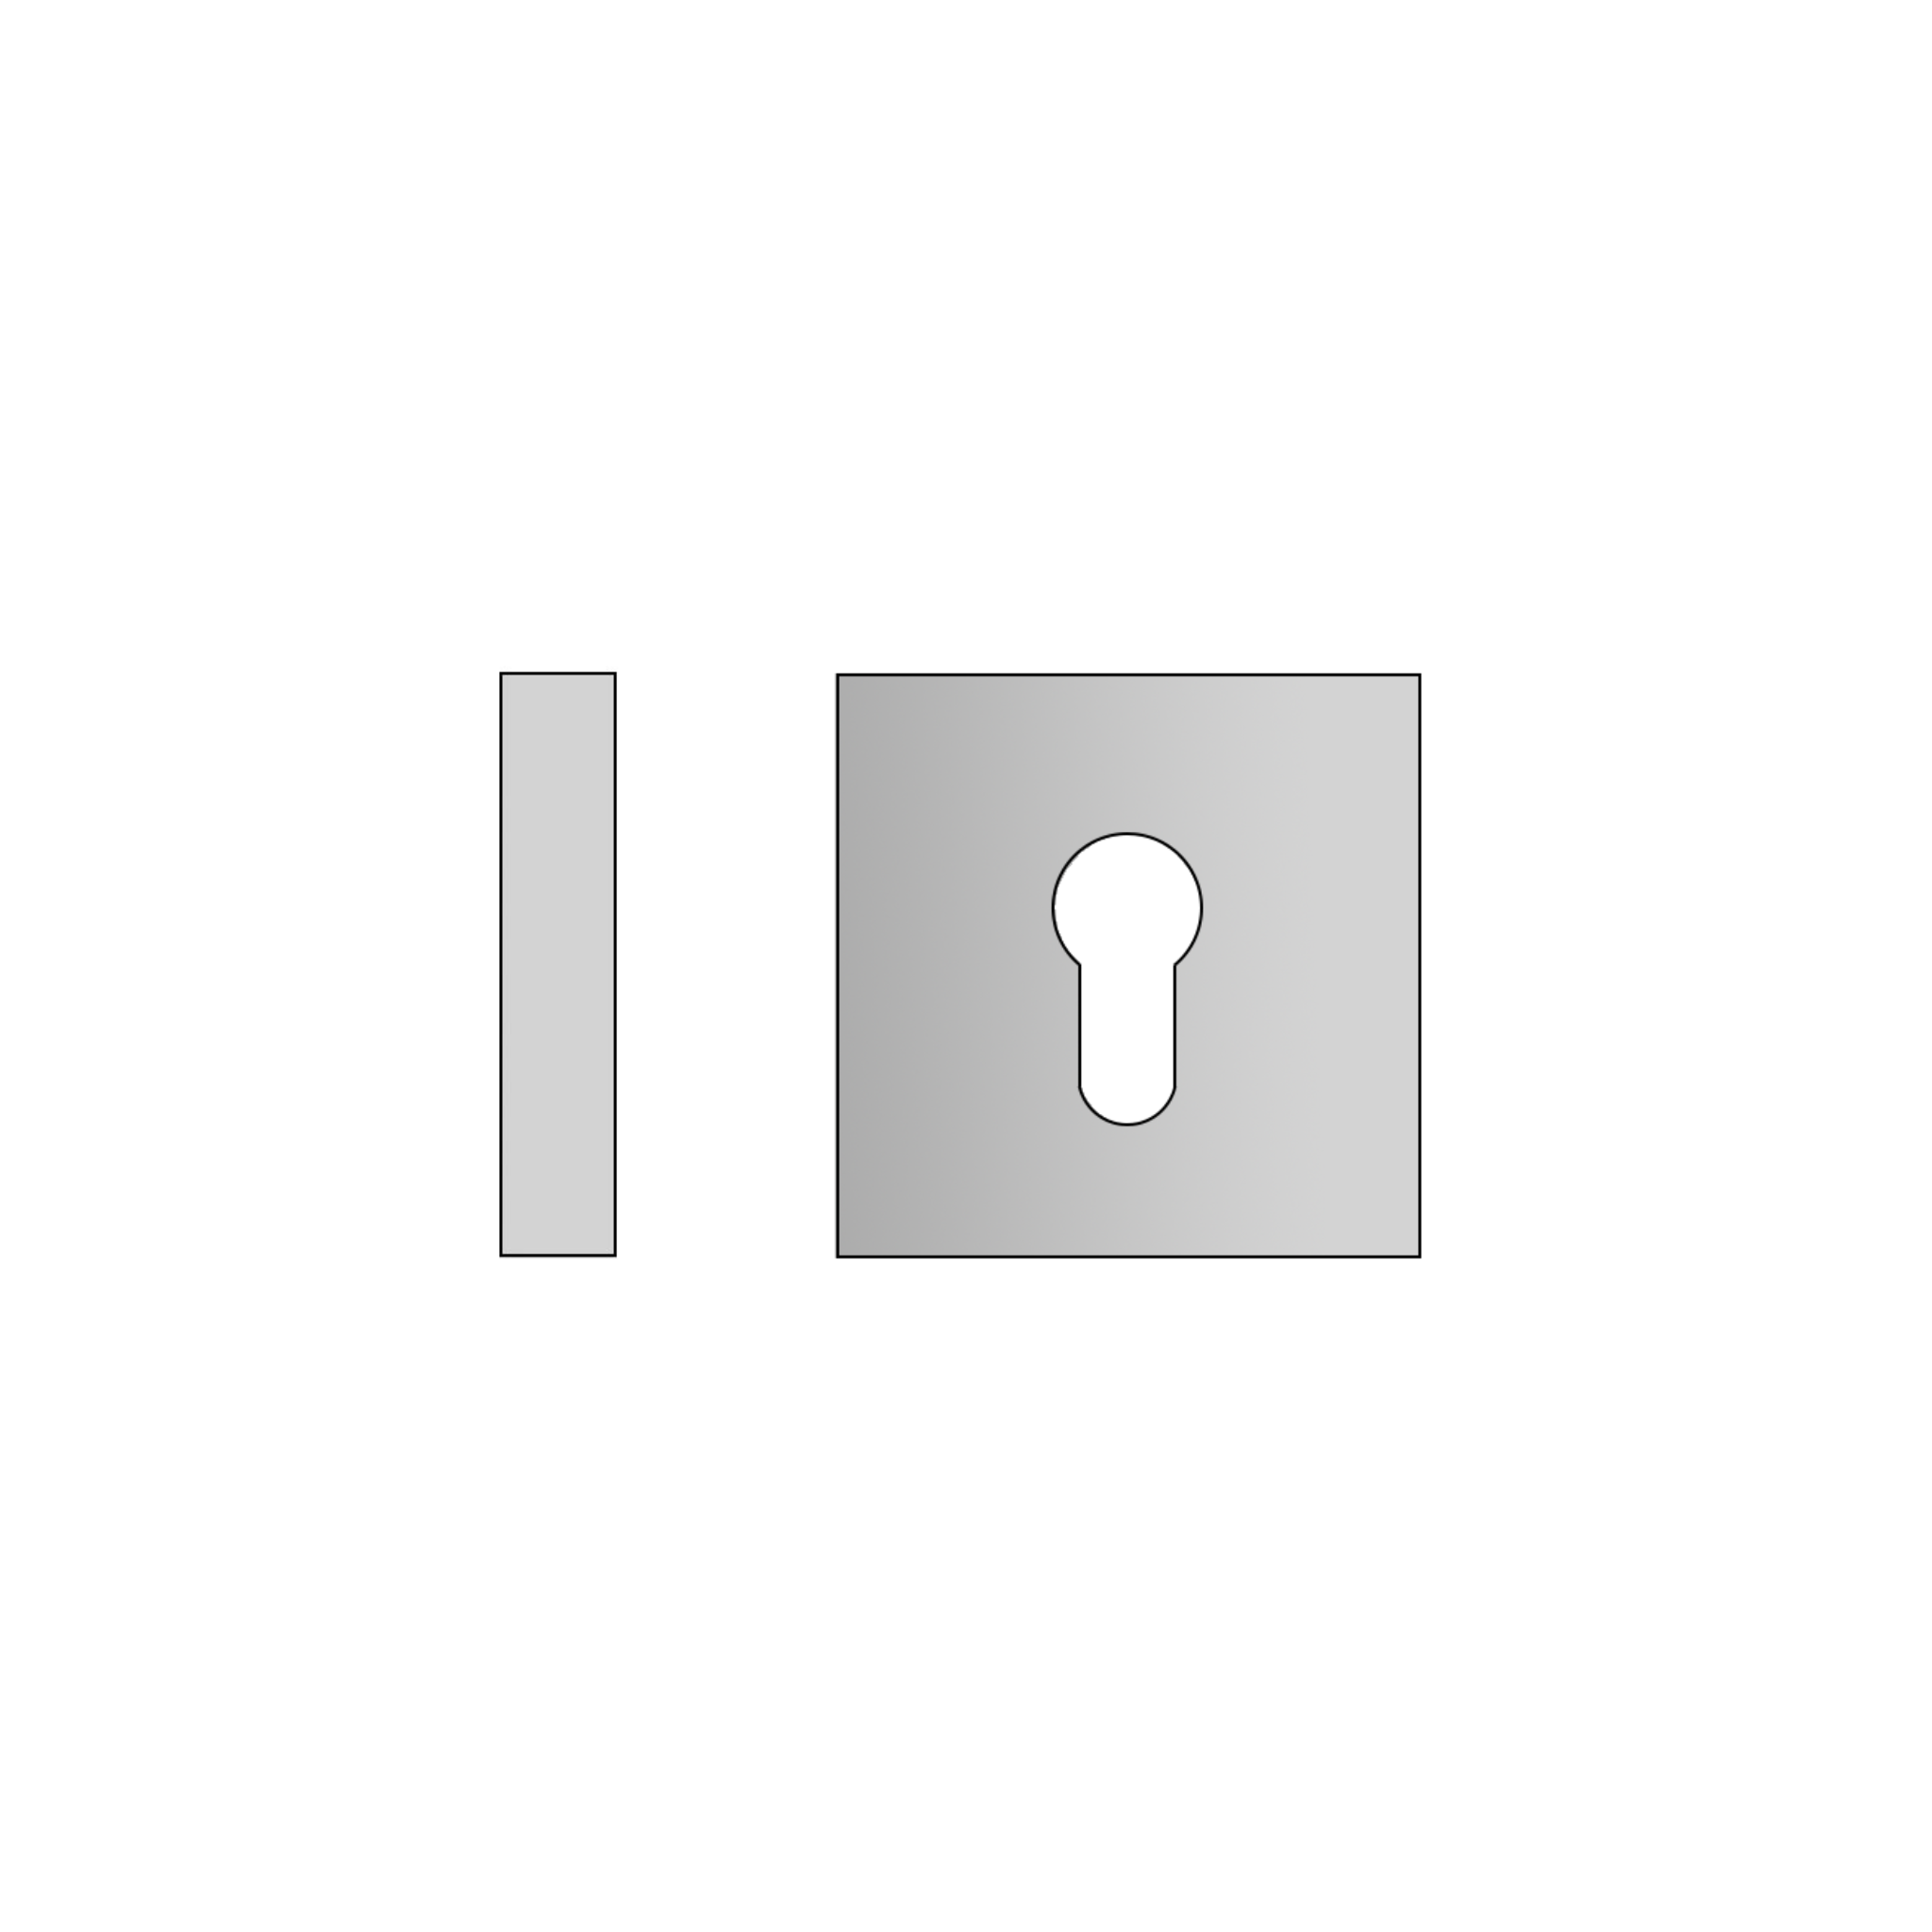 QS4473, Cylinder Escutcheon, Square Rose, 52mm (h) x 52mm (w) x 8mm (t), Stainless Steel, QS